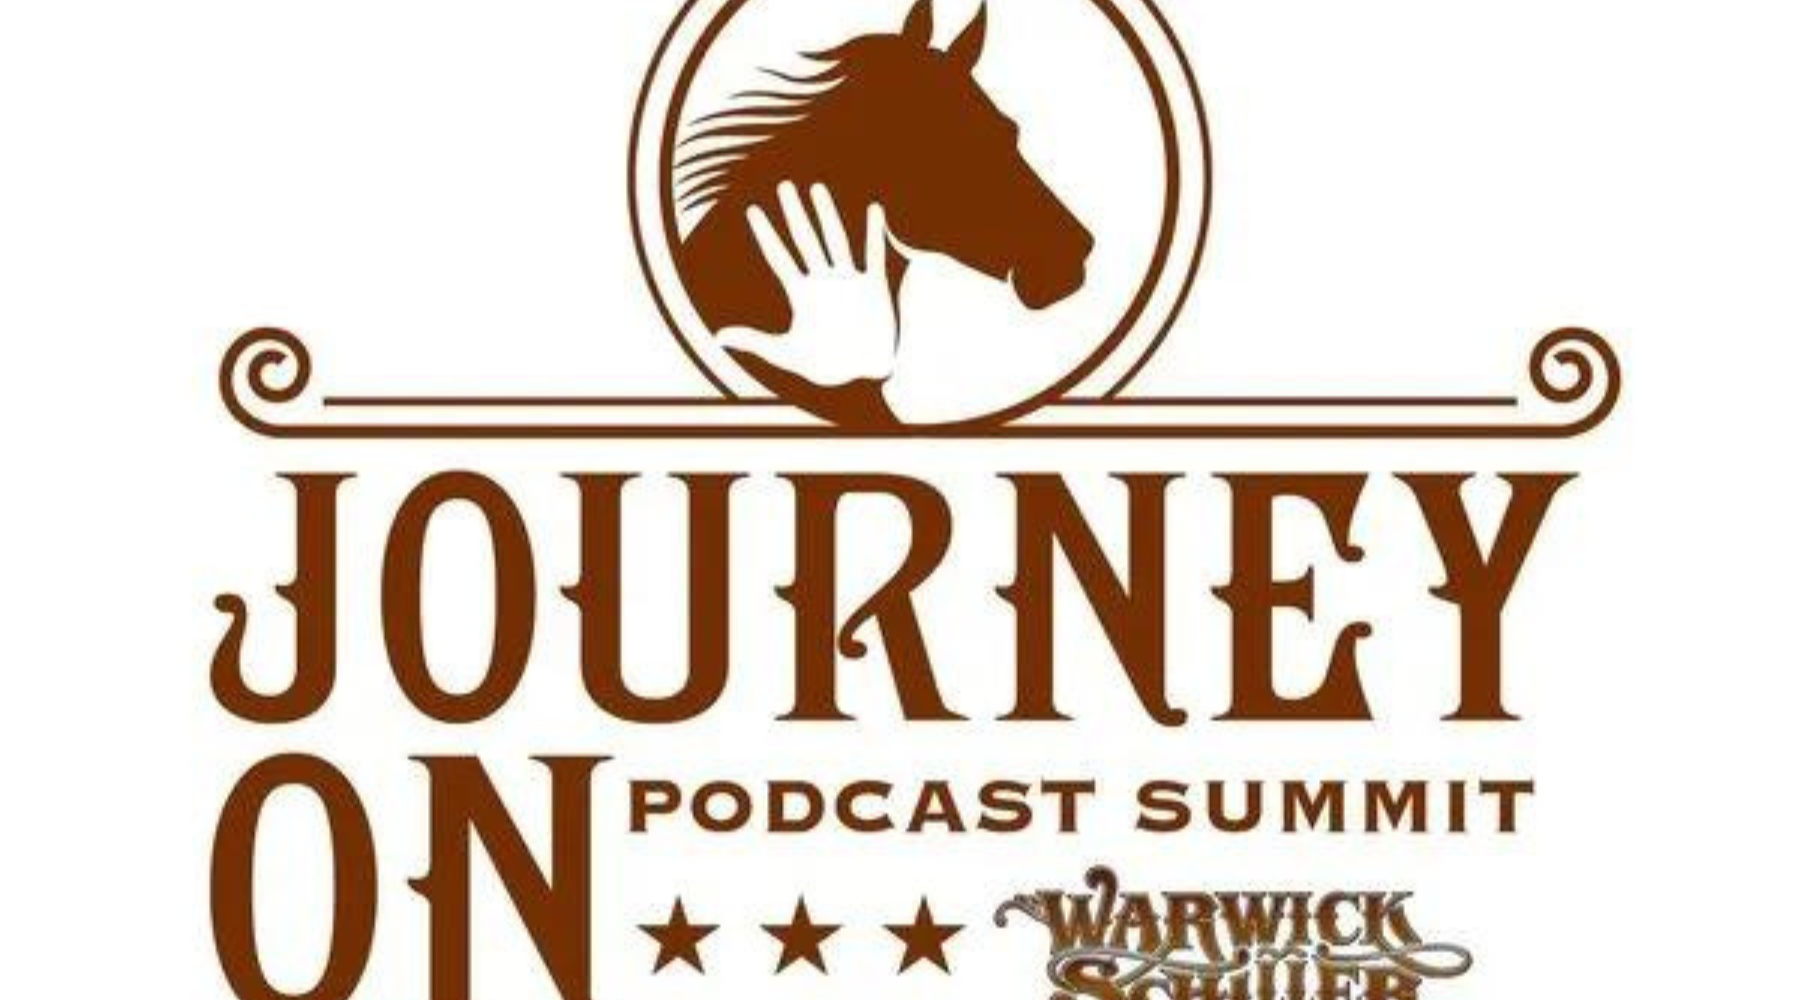 My Presentation At The Journey On Podcast Summit